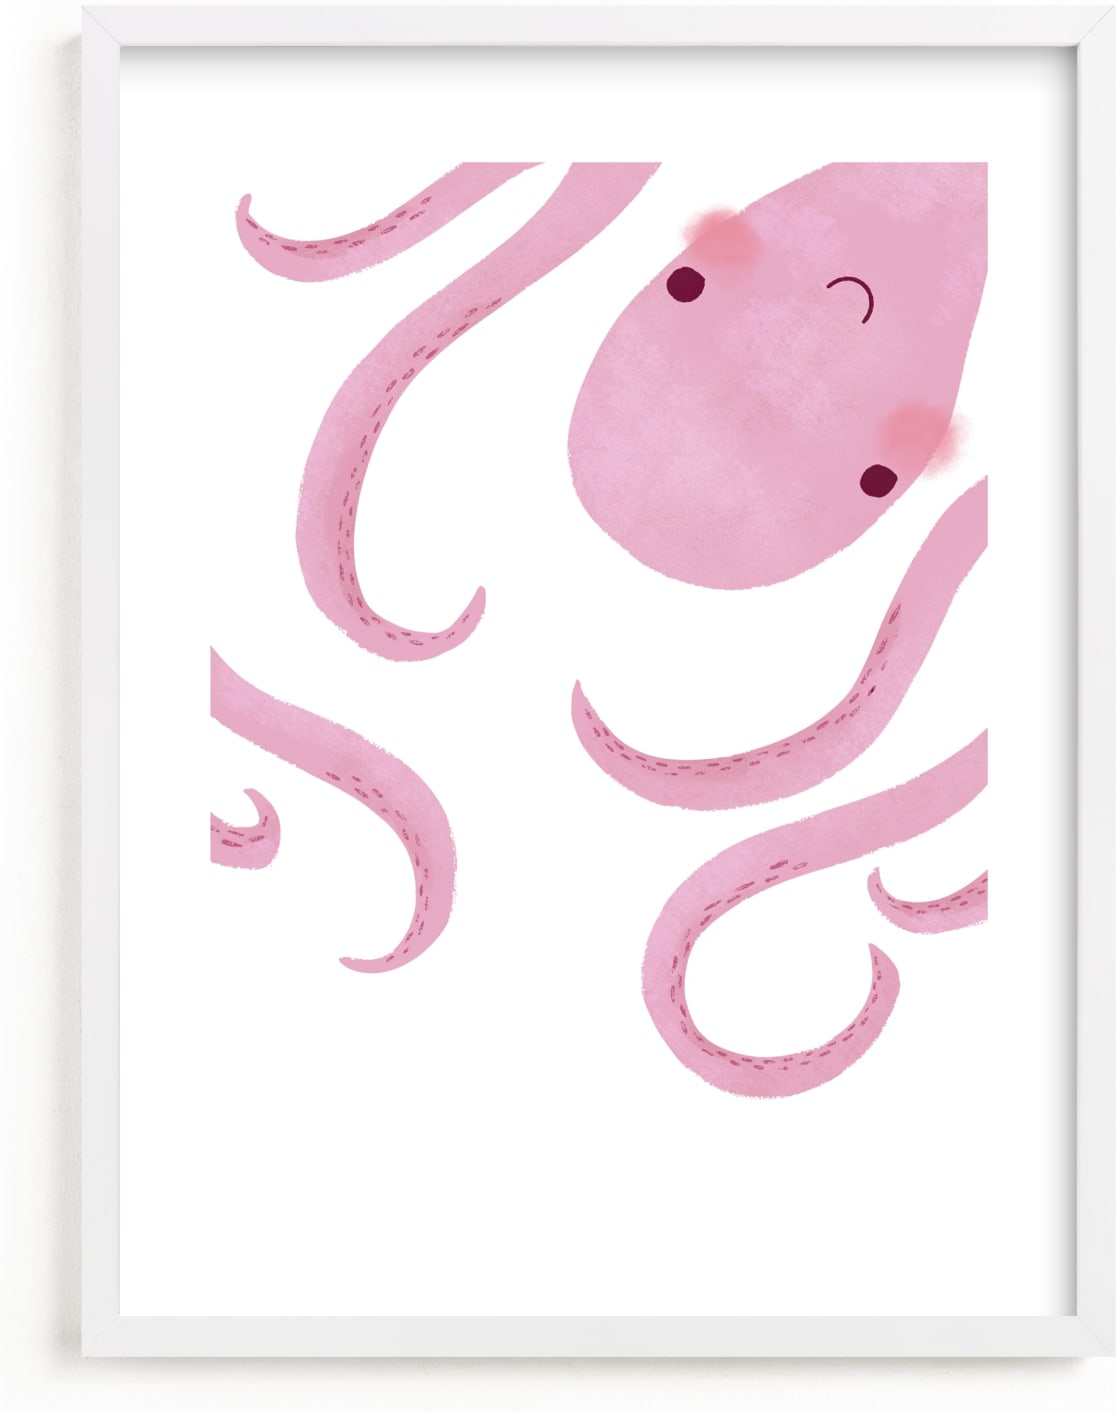 This is a pink art by Jackie Crawford called Little Septopus.